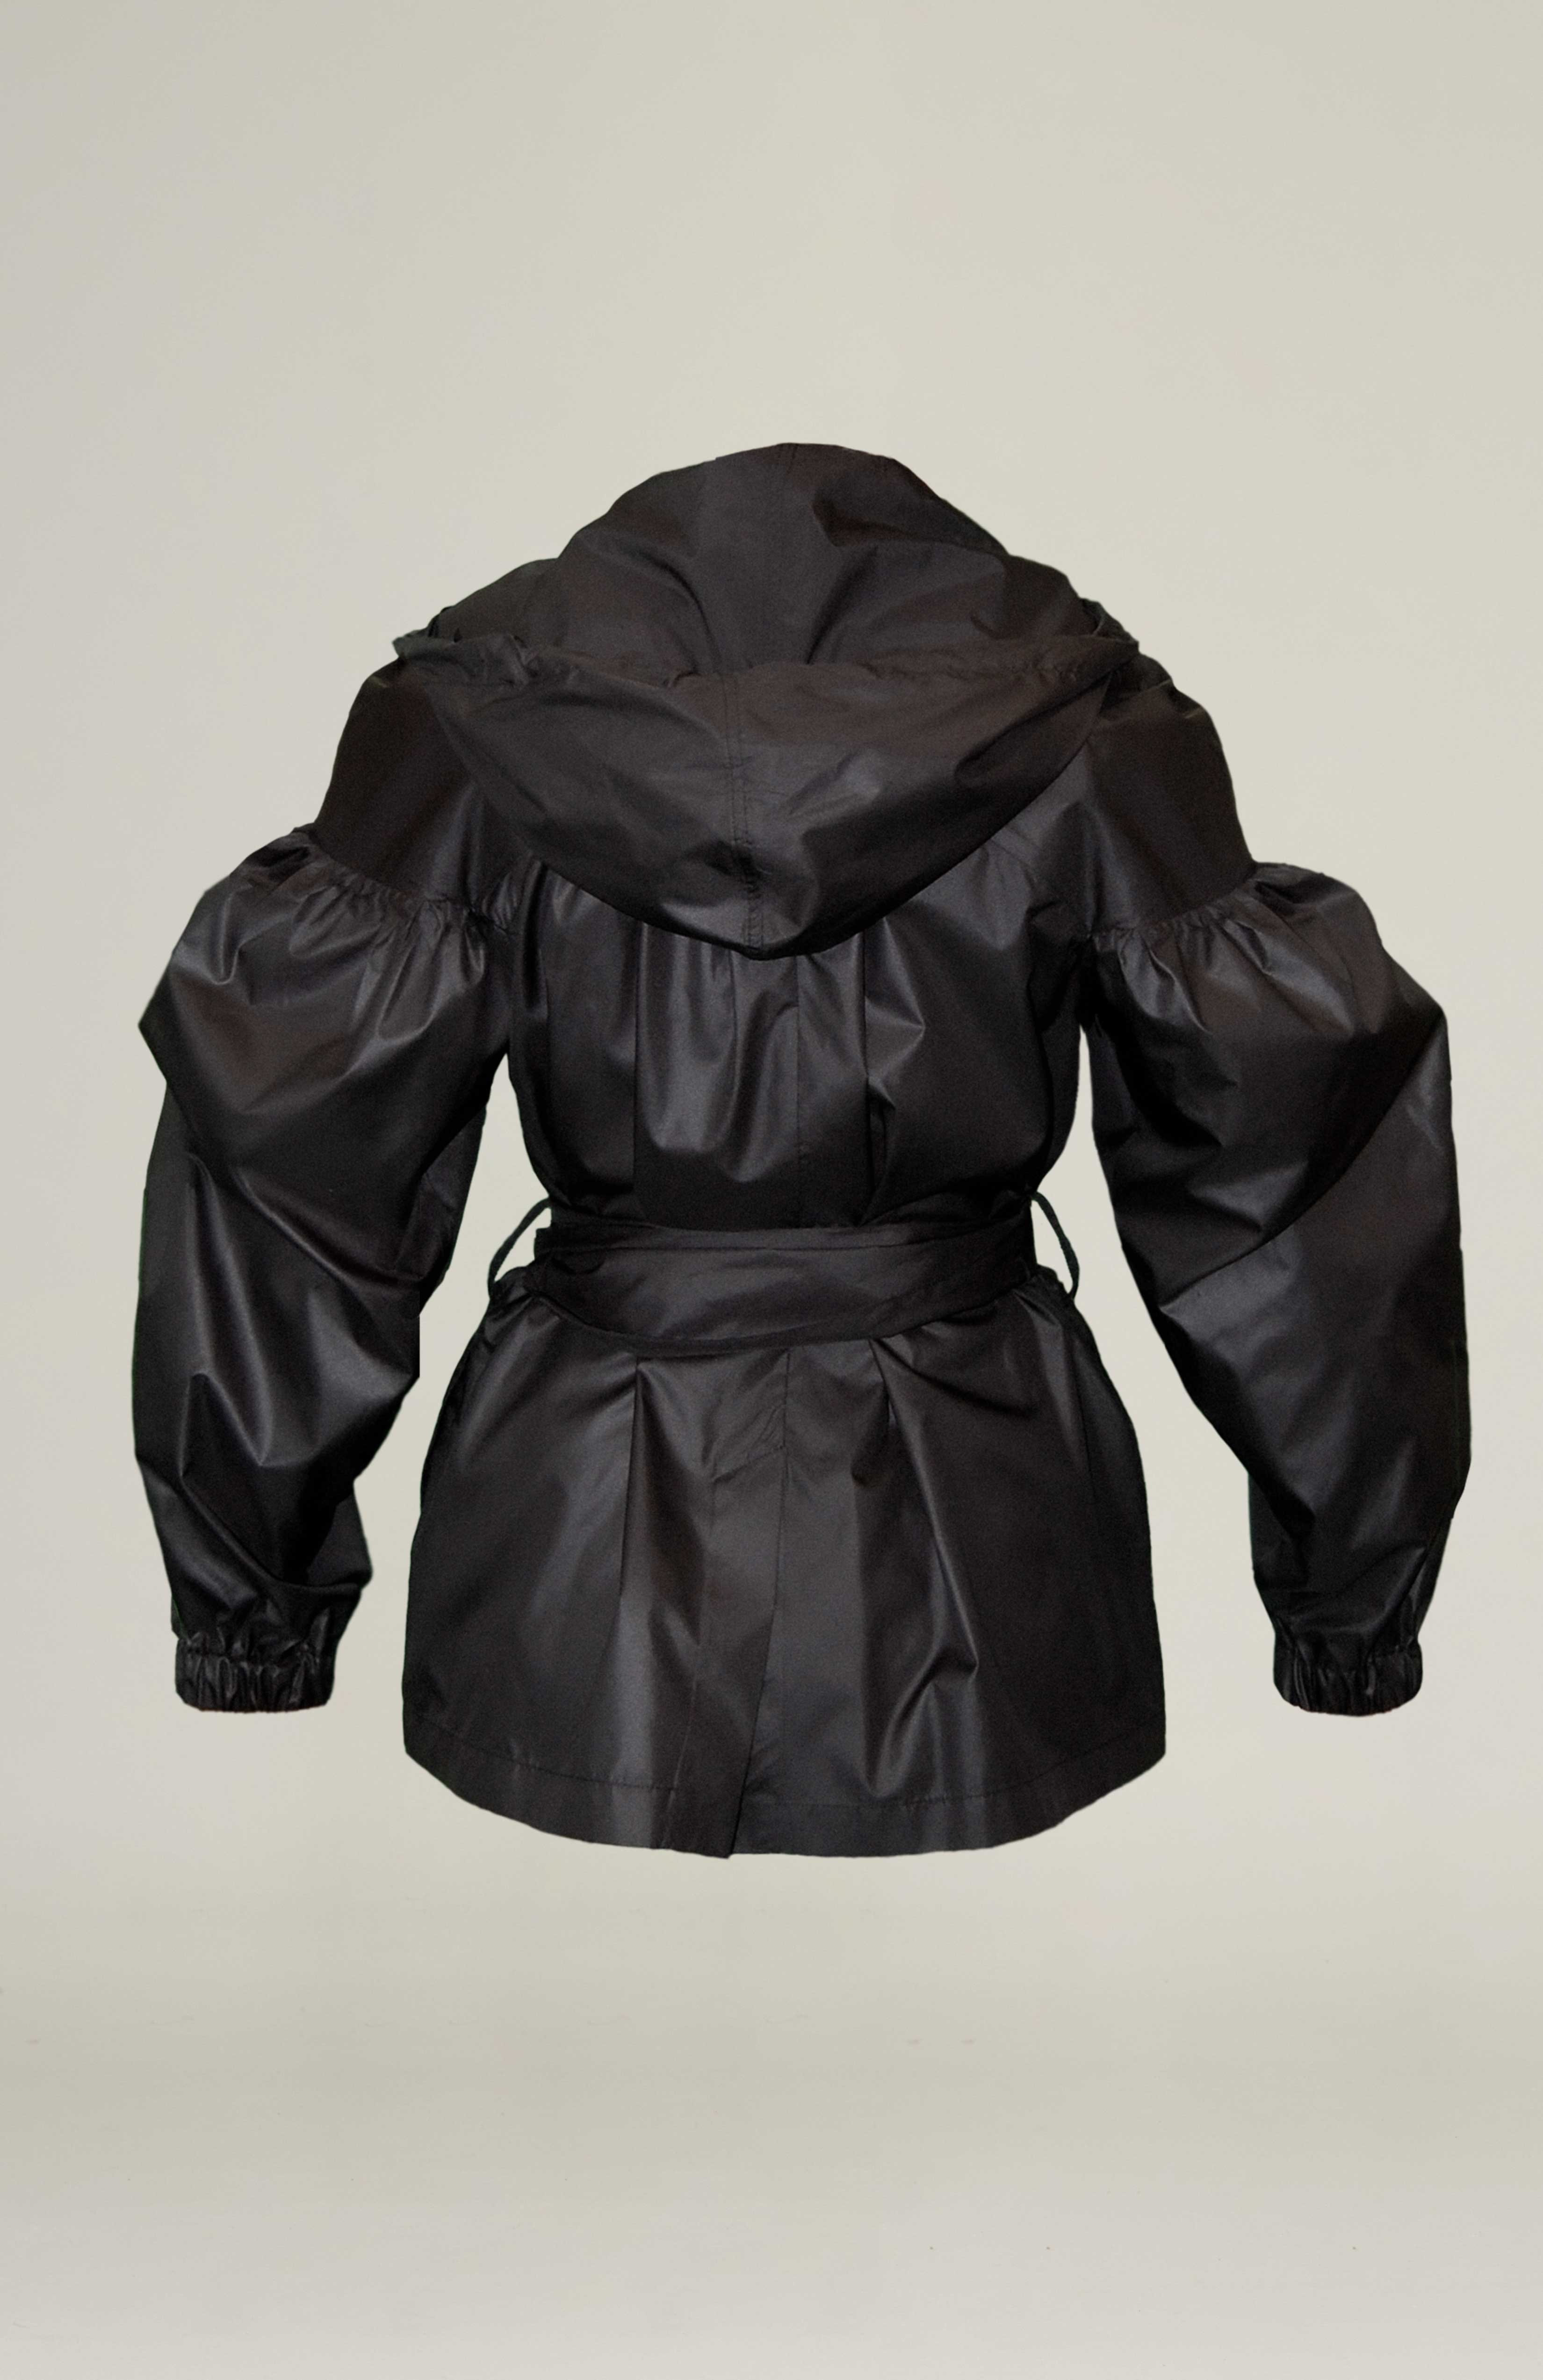 Back veiw, Light weight double breasted trench jacket with dramatic gathered sleeves. Adjustable pull string hood and elasticated cuffs. Side seam pockets and belt loops. Comes with waist belt fasten